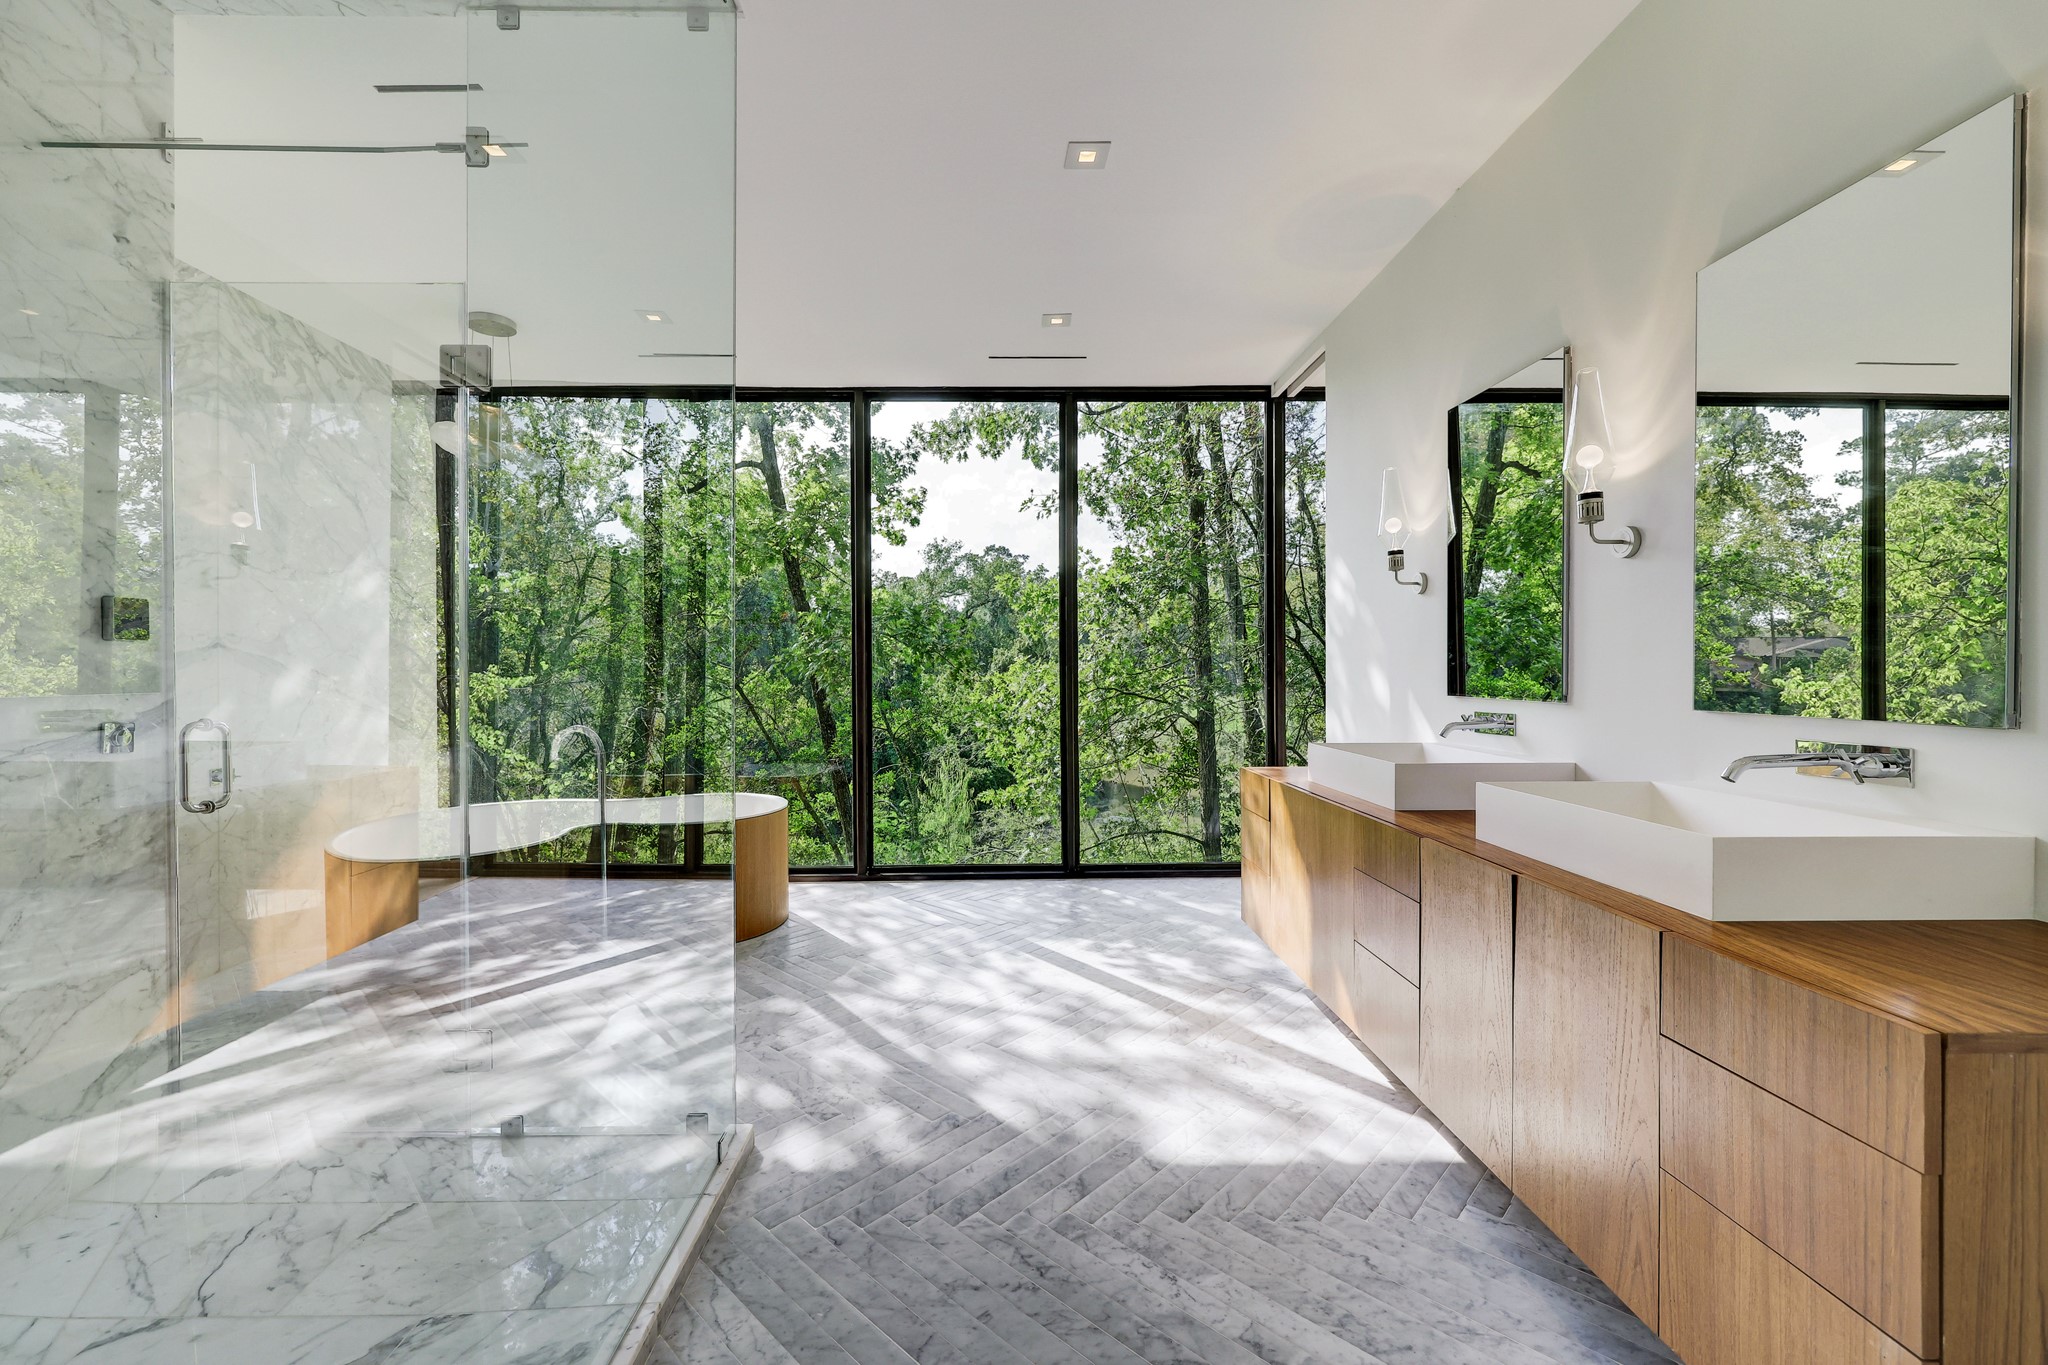 [Primary Bath]
The Zen-inspired bath offers a herringbone-pattern marble tile floor; floating teak cabinets with vessel sinks; a free-standing, amoeba-shaped bathtub with floor-mounted faucet; a seamless-glass, teak, and marble steam shower; and a private water closet.